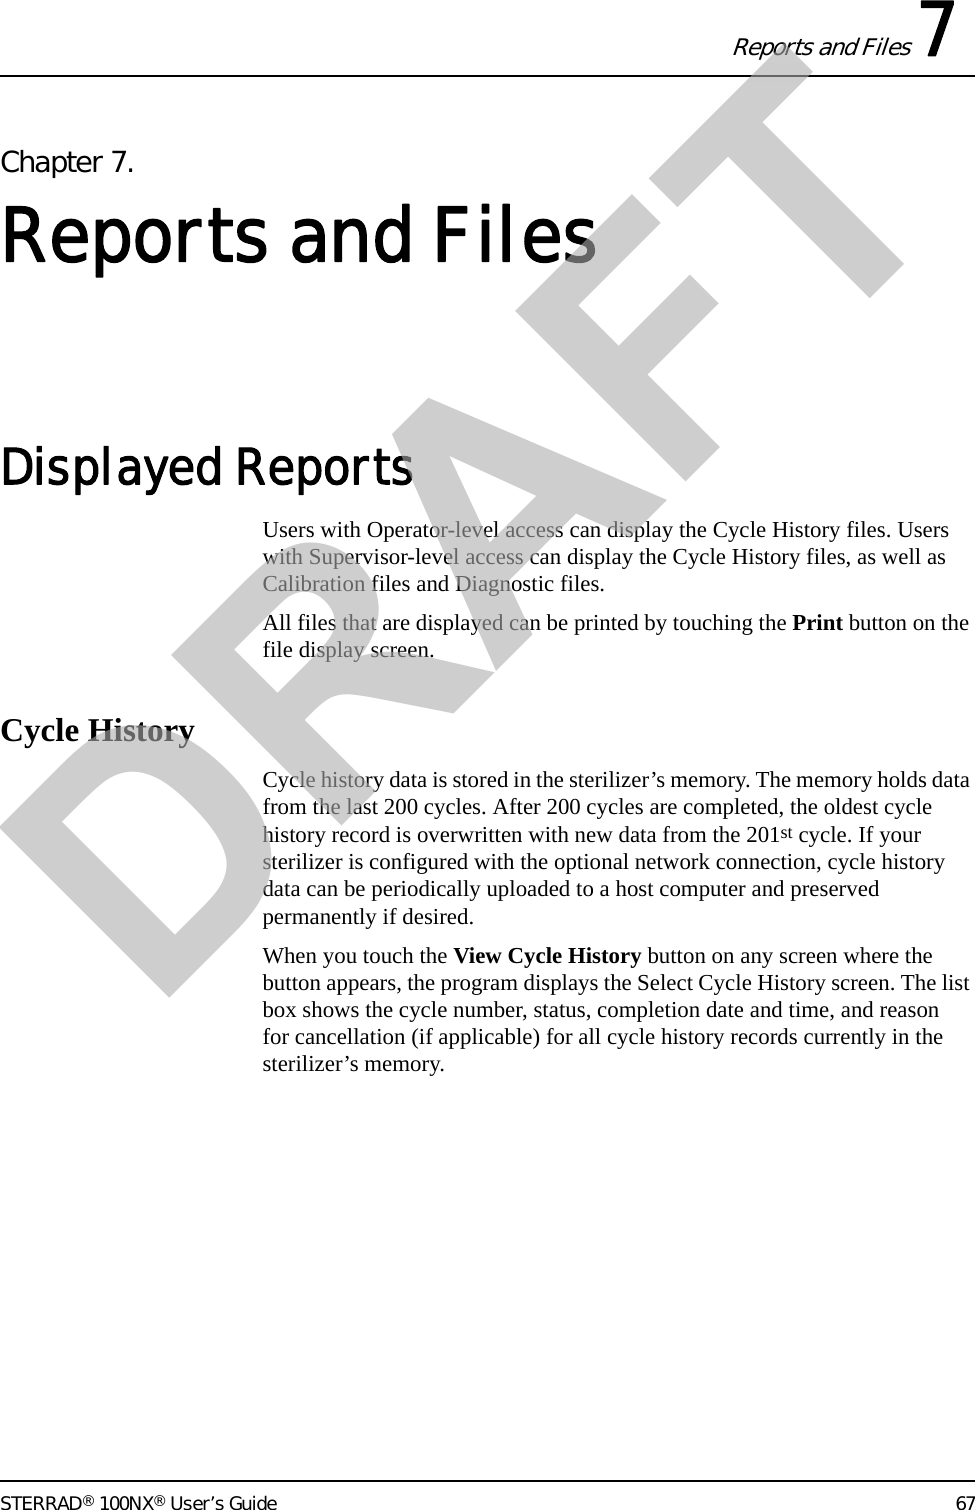 Reports and Files 7STERRAD® 100NX® User’s Guide 67Chapter 7.Reports and FilesDisplayed Reports Users with Operator-level access can display the Cycle History files. Users with Supervisor-level access can display the Cycle History files, as well as Calibration files and Diagnostic files.All files that are displayed can be printed by touching the Print button on the file display screen.Cycle HistoryCycle history data is stored in the sterilizer’s memory. The memory holds data from the last 200 cycles. After 200 cycles are completed, the oldest cycle history record is overwritten with new data from the 201st cycle. If your sterilizer is configured with the optional network connection, cycle history data can be periodically uploaded to a host computer and preserved permanently if desired.When you touch the View Cycle History button on any screen where the button appears, the program displays the Select Cycle History screen. The list box shows the cycle number, status, completion date and time, and reason for cancellation (if applicable) for all cycle history records currently in the sterilizer’s memory.DRAFT